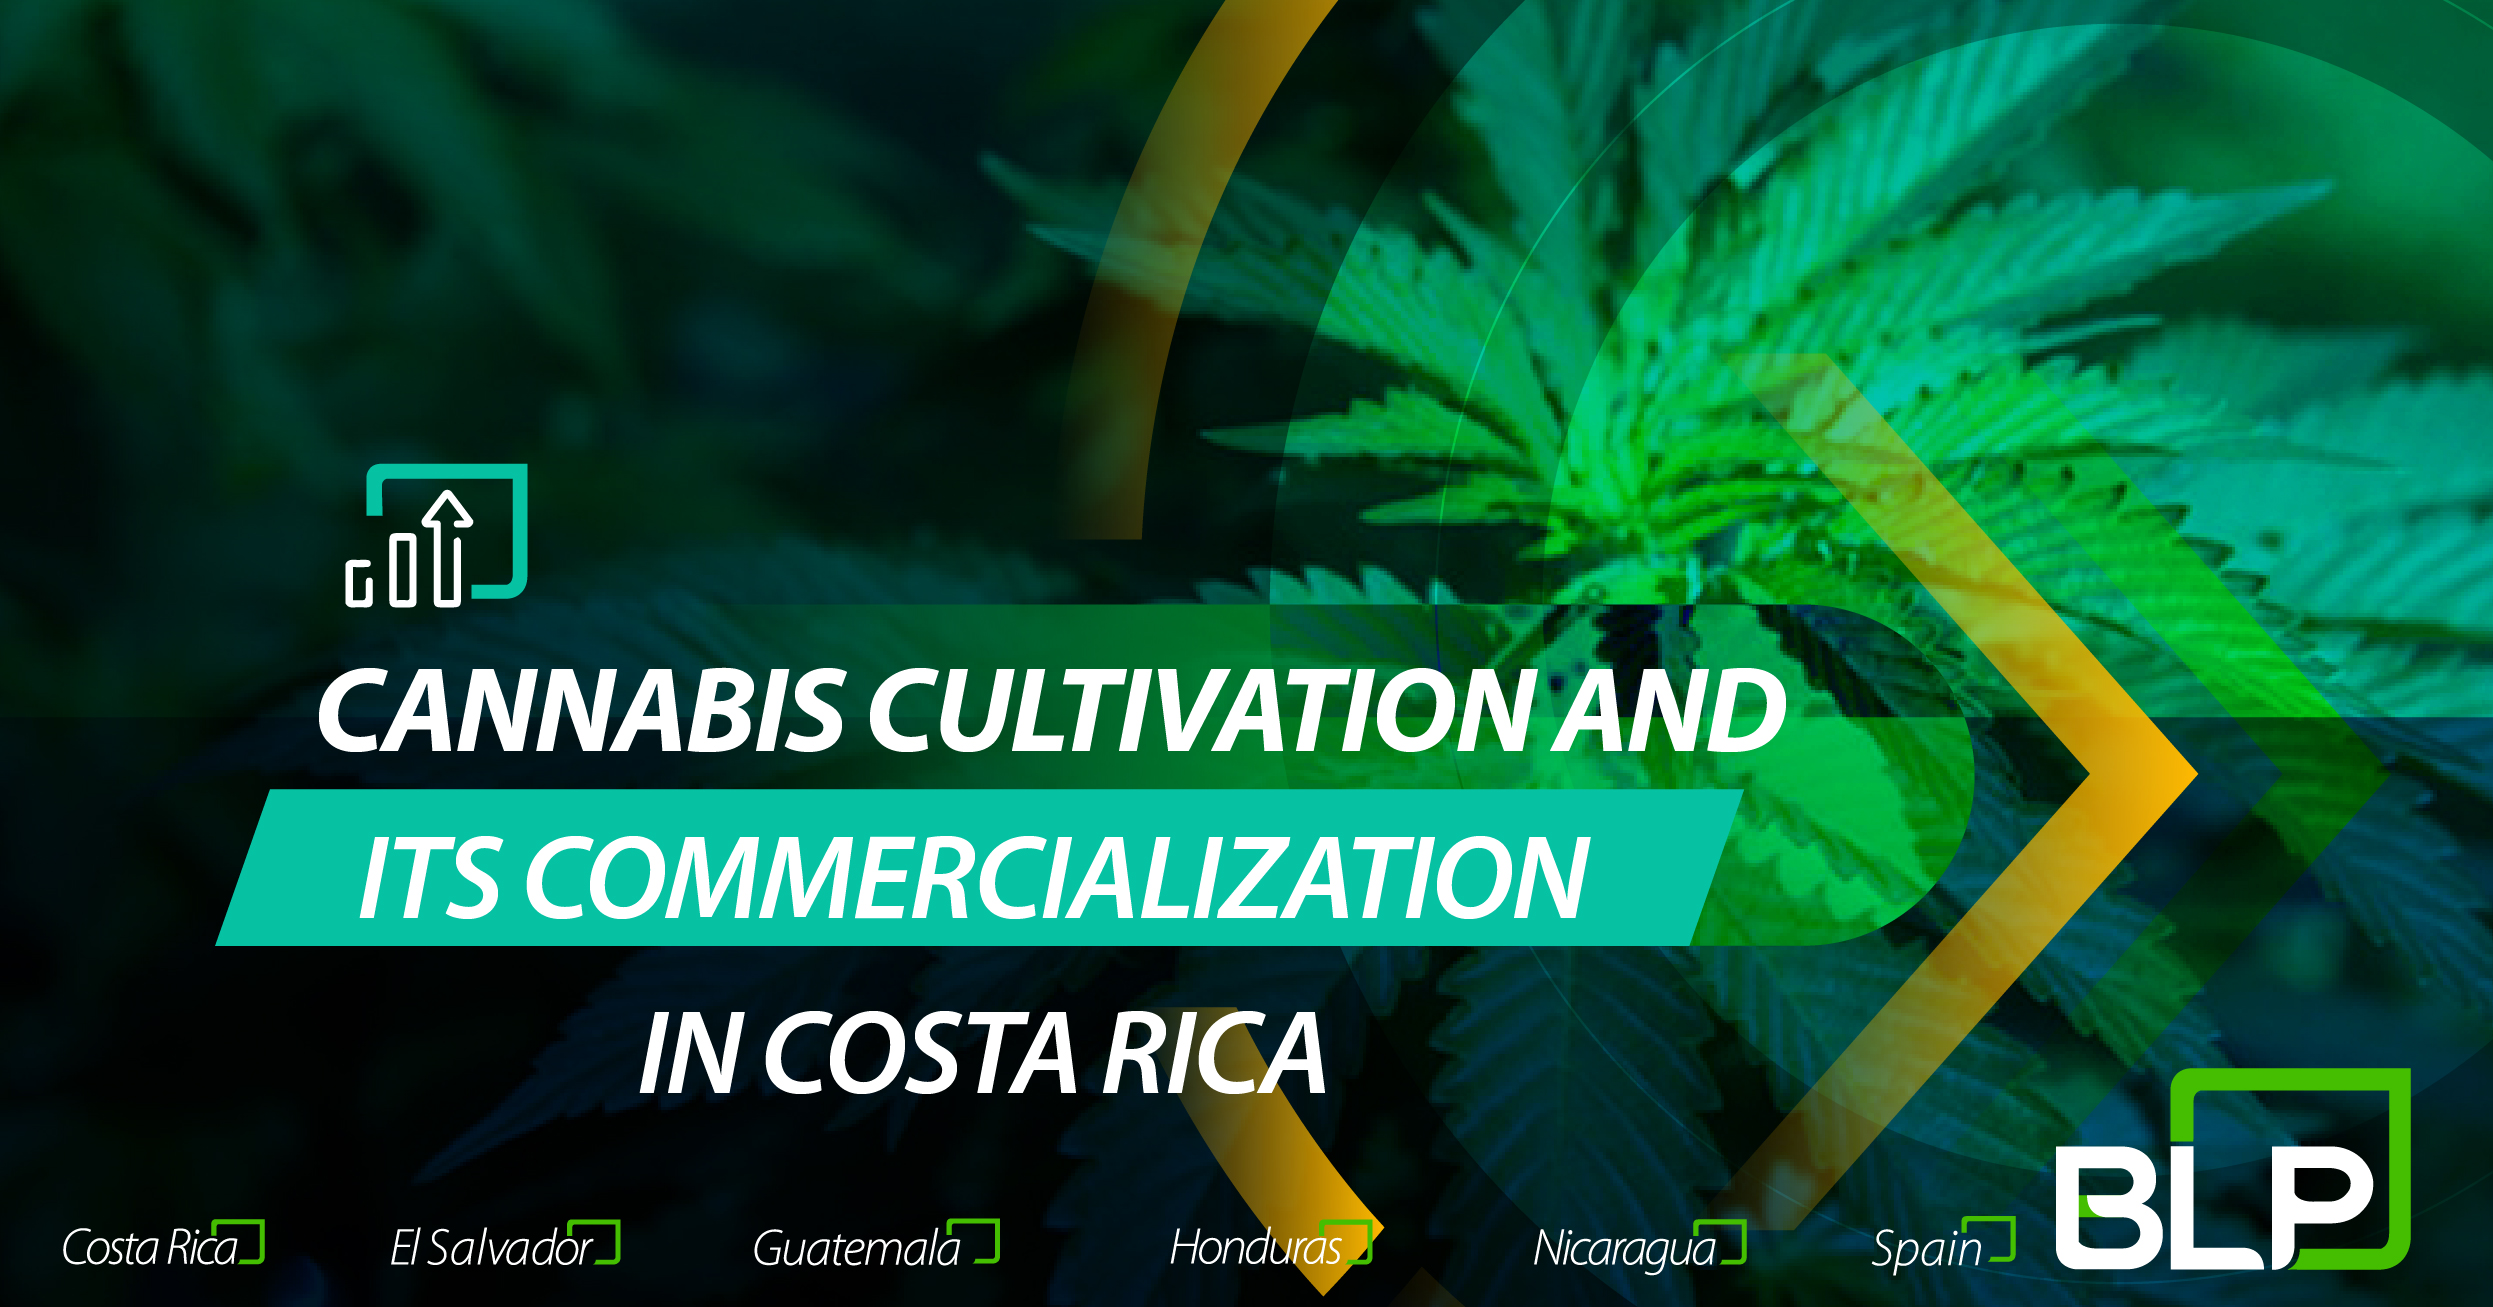 Business Opportunities for the Cultivation and Commerce of Cannabis in Costa Rica